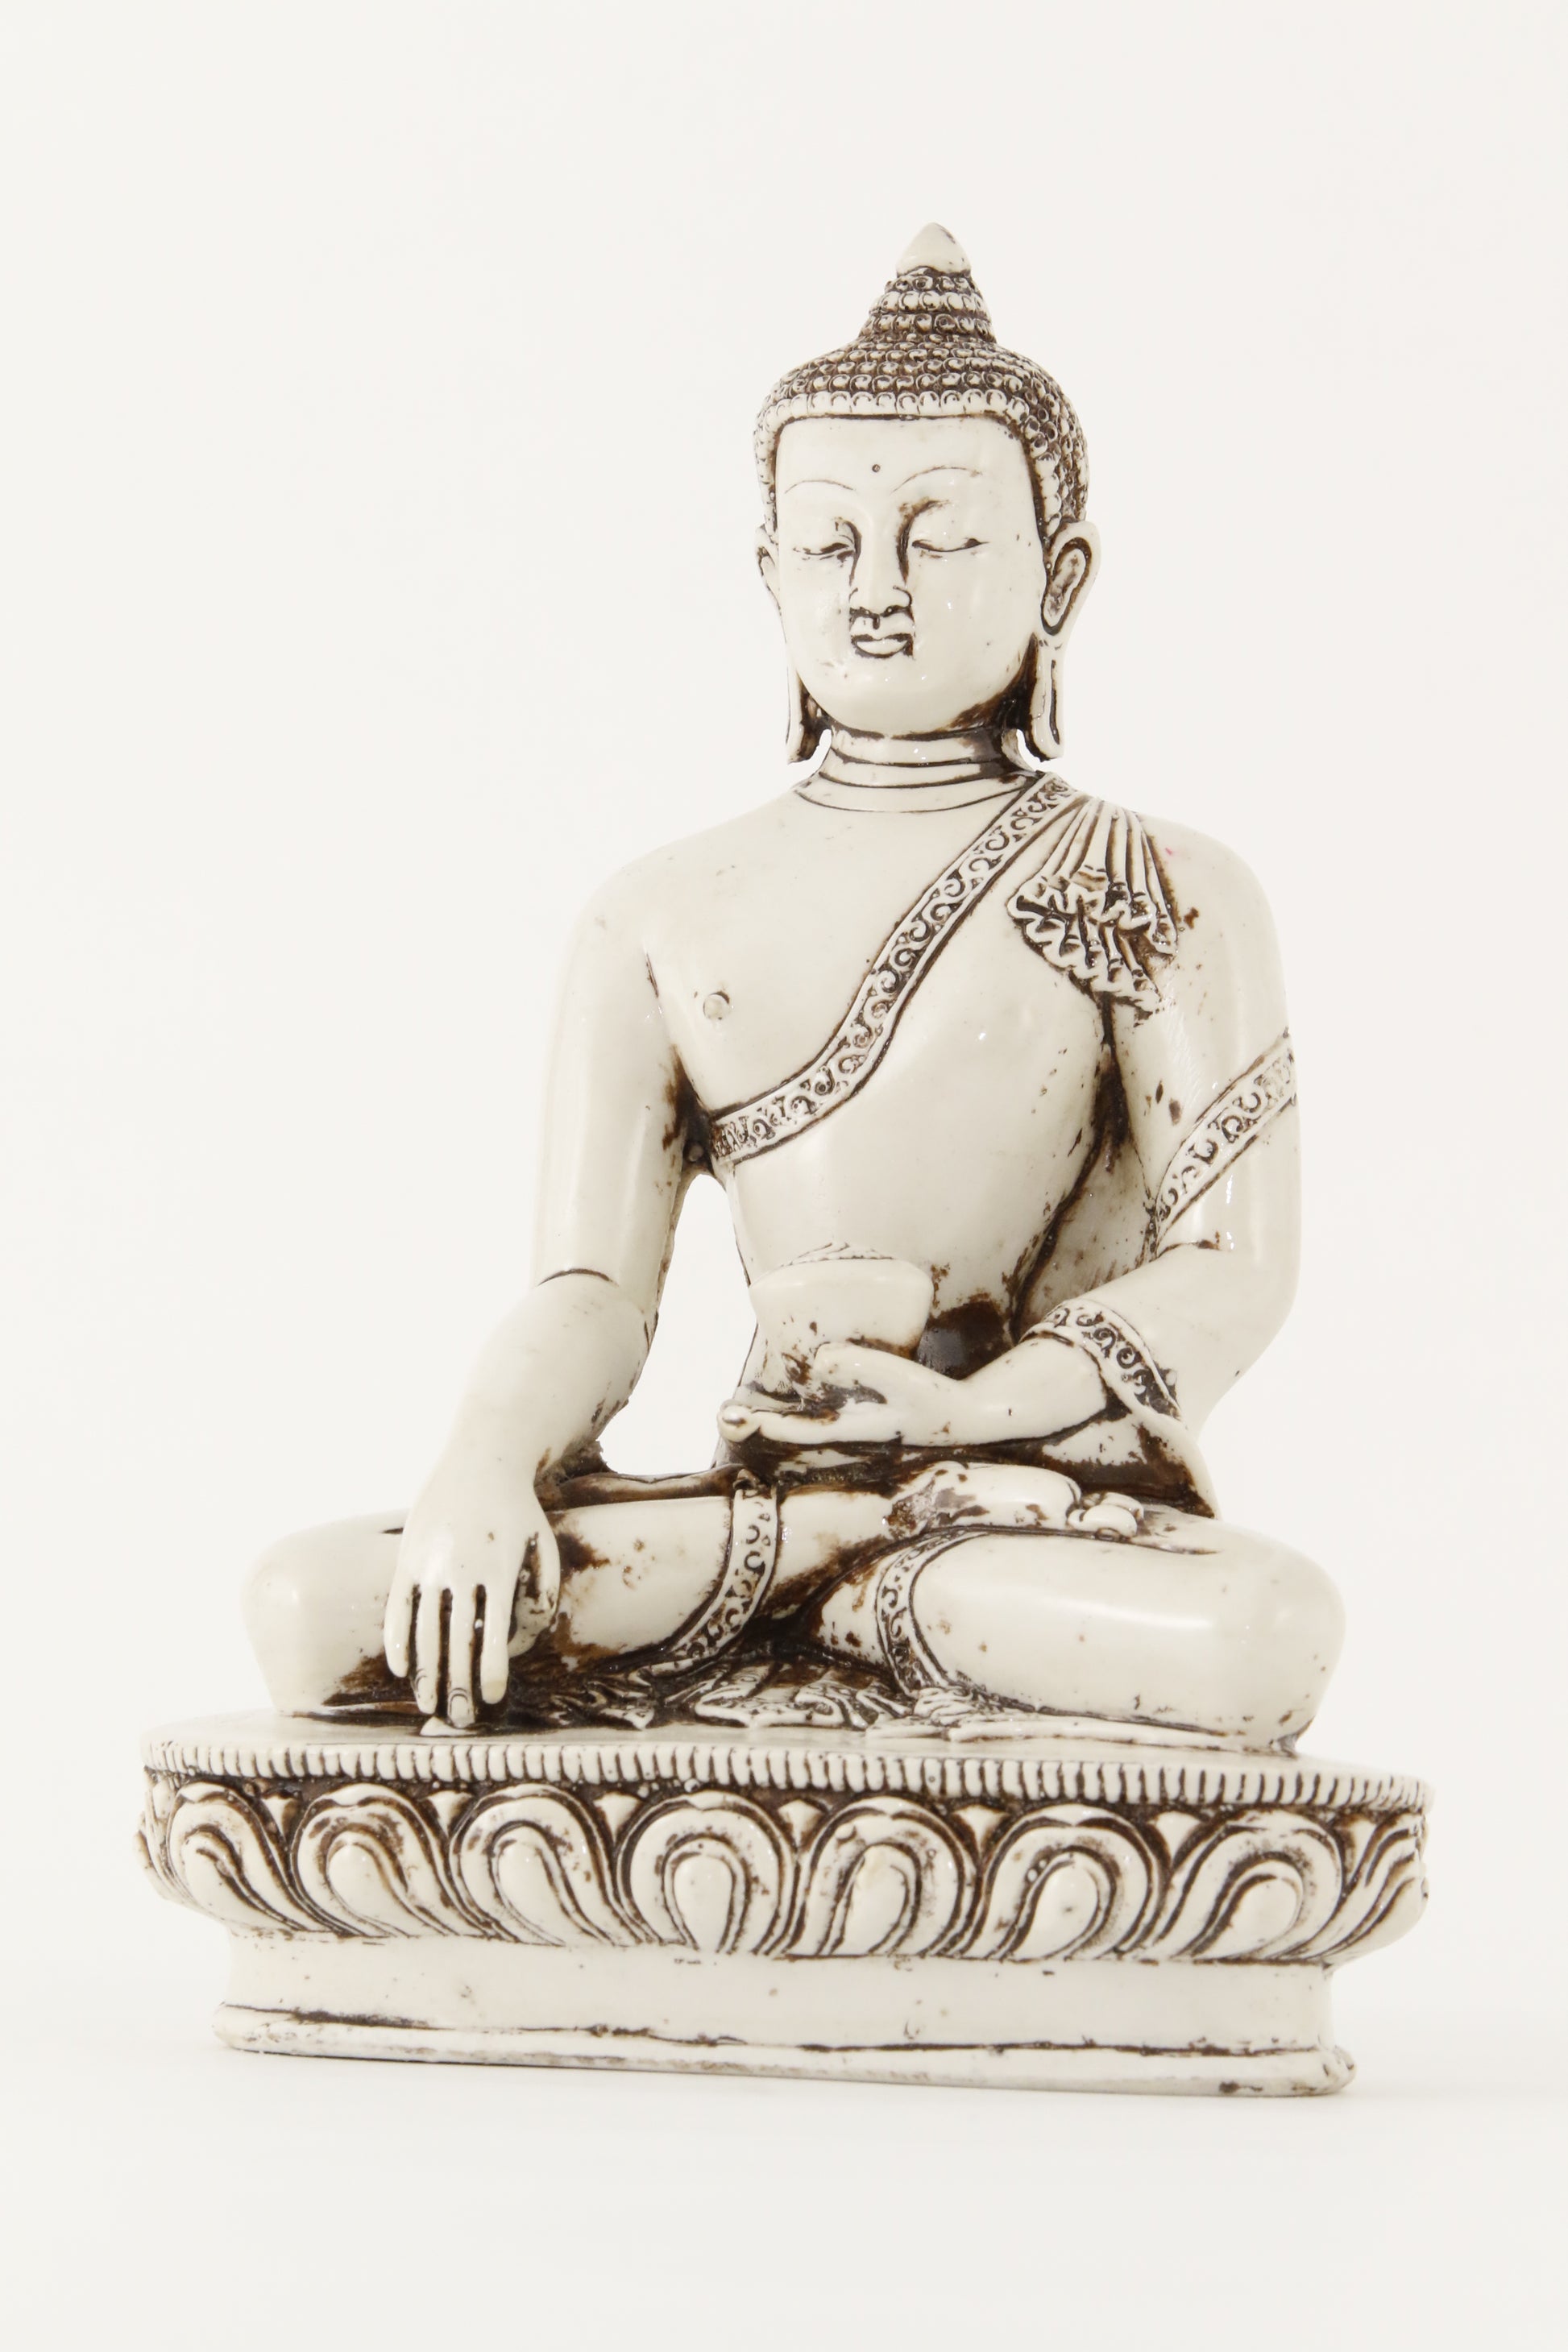 EARTH TOUCHING BUDDHA STATUE OFF-WHITE LARGE SIDE VIEW